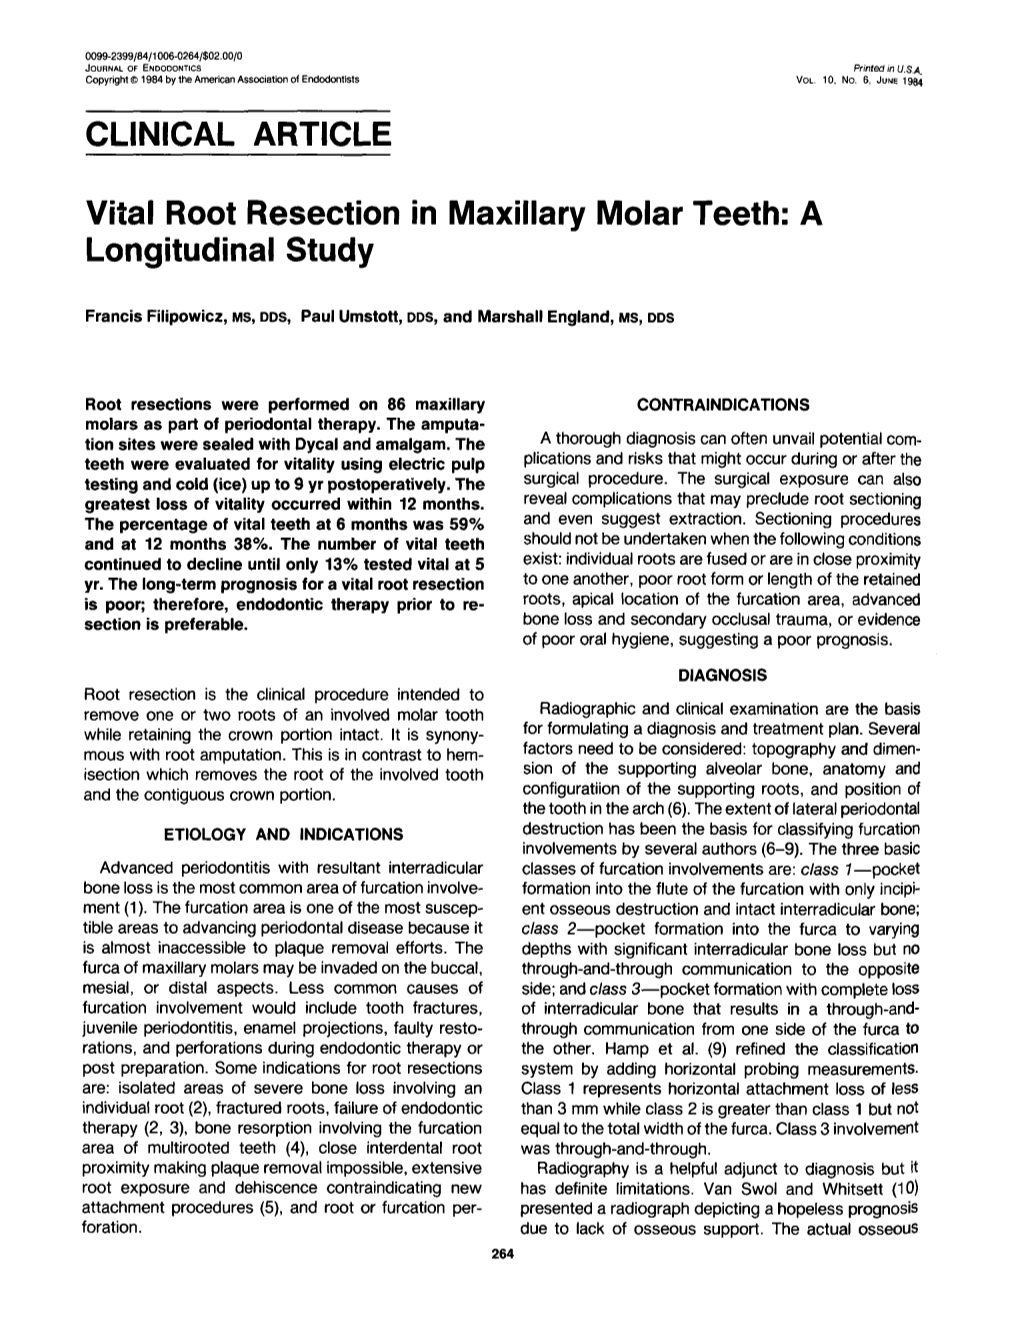 CLINICAL ARTICLE Vital Root Resection In